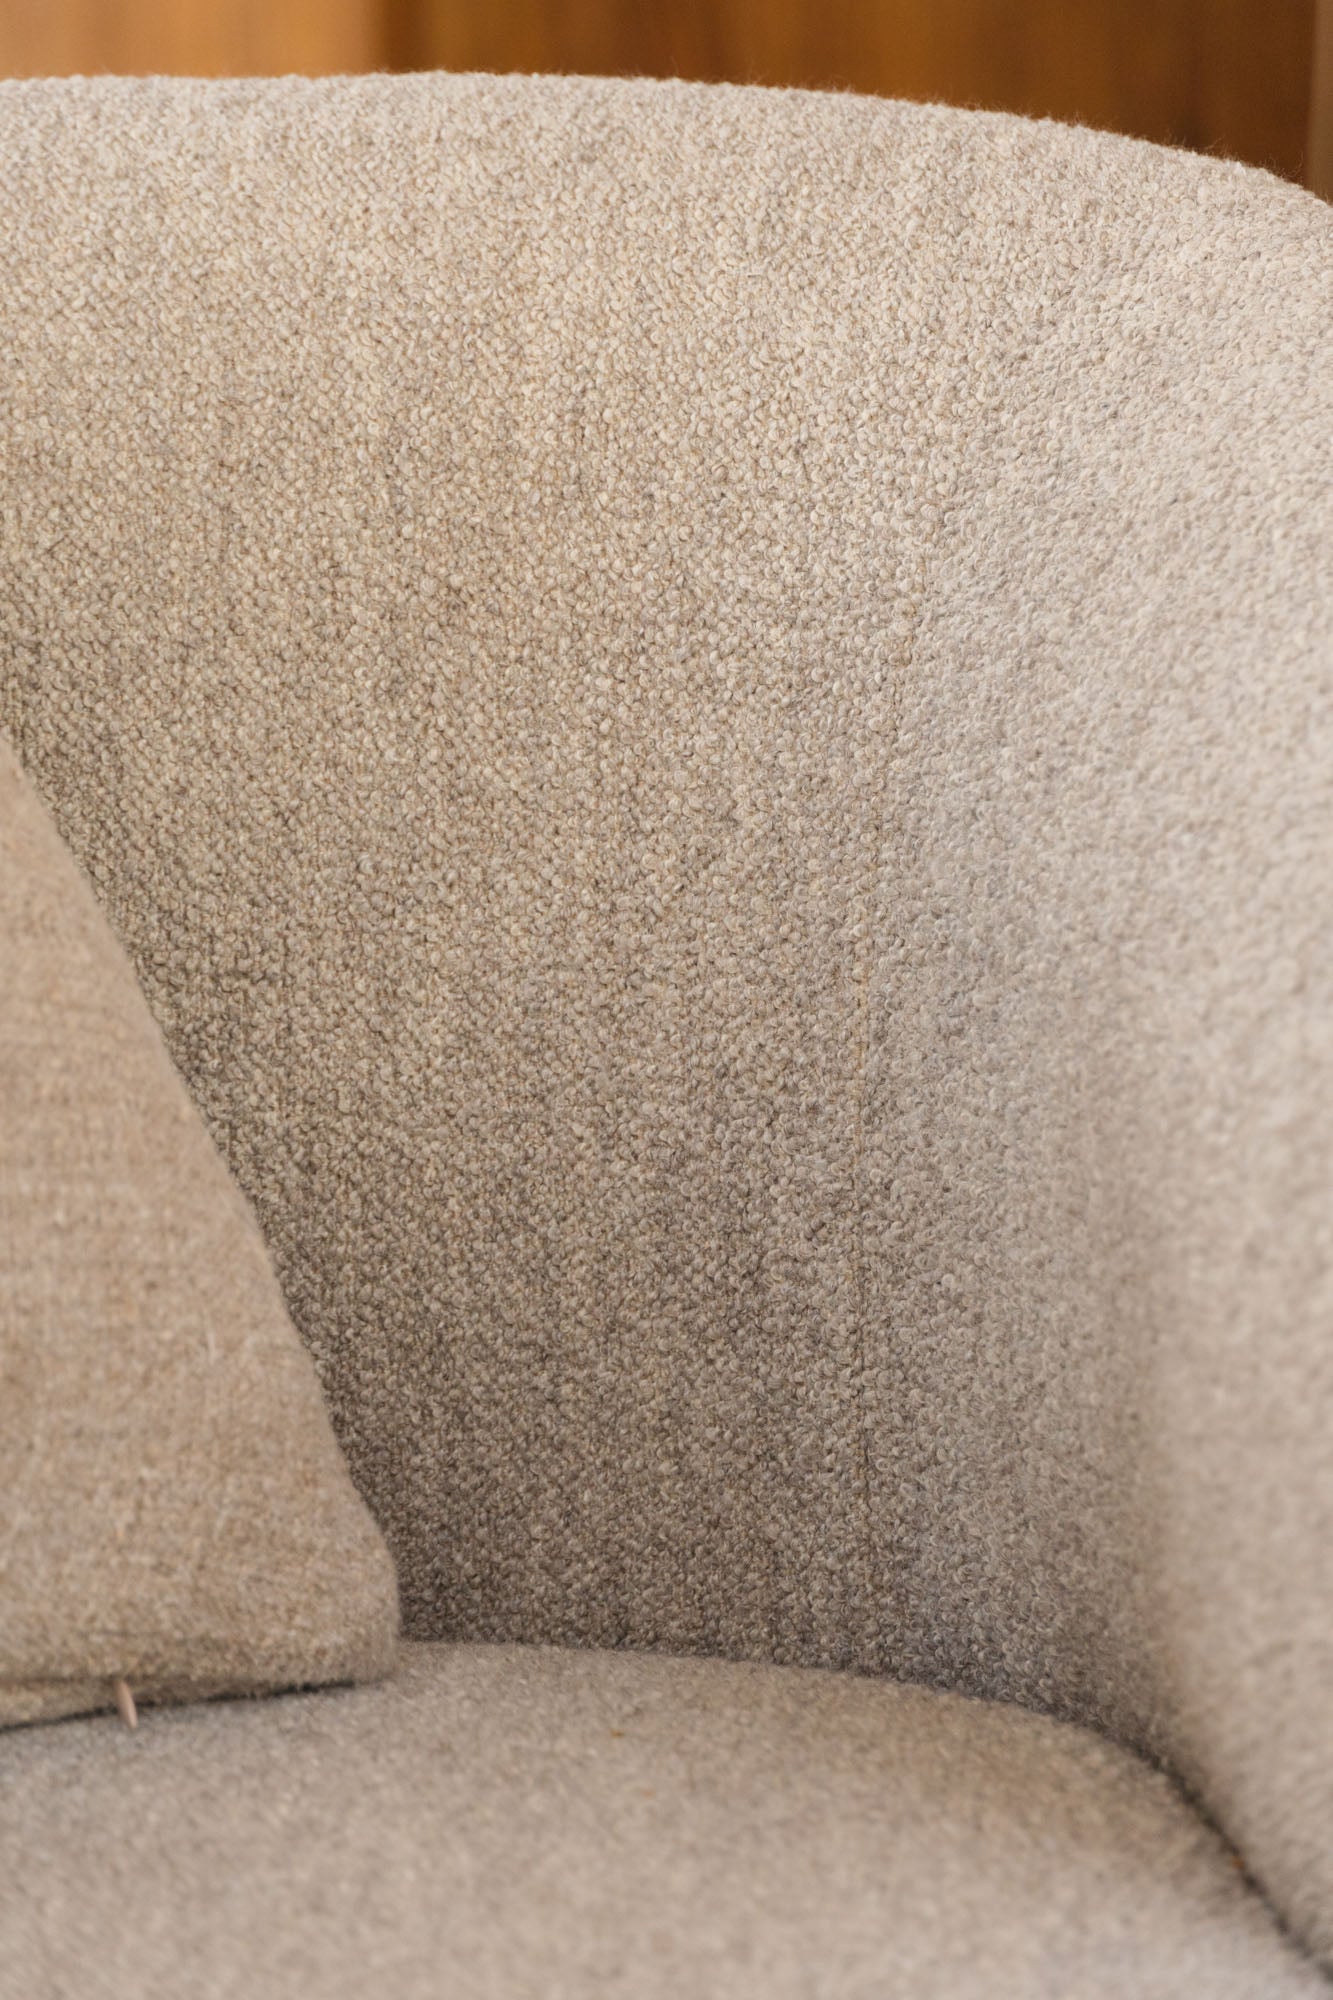 Close-up of the Covent Lounge Chair by New Works.